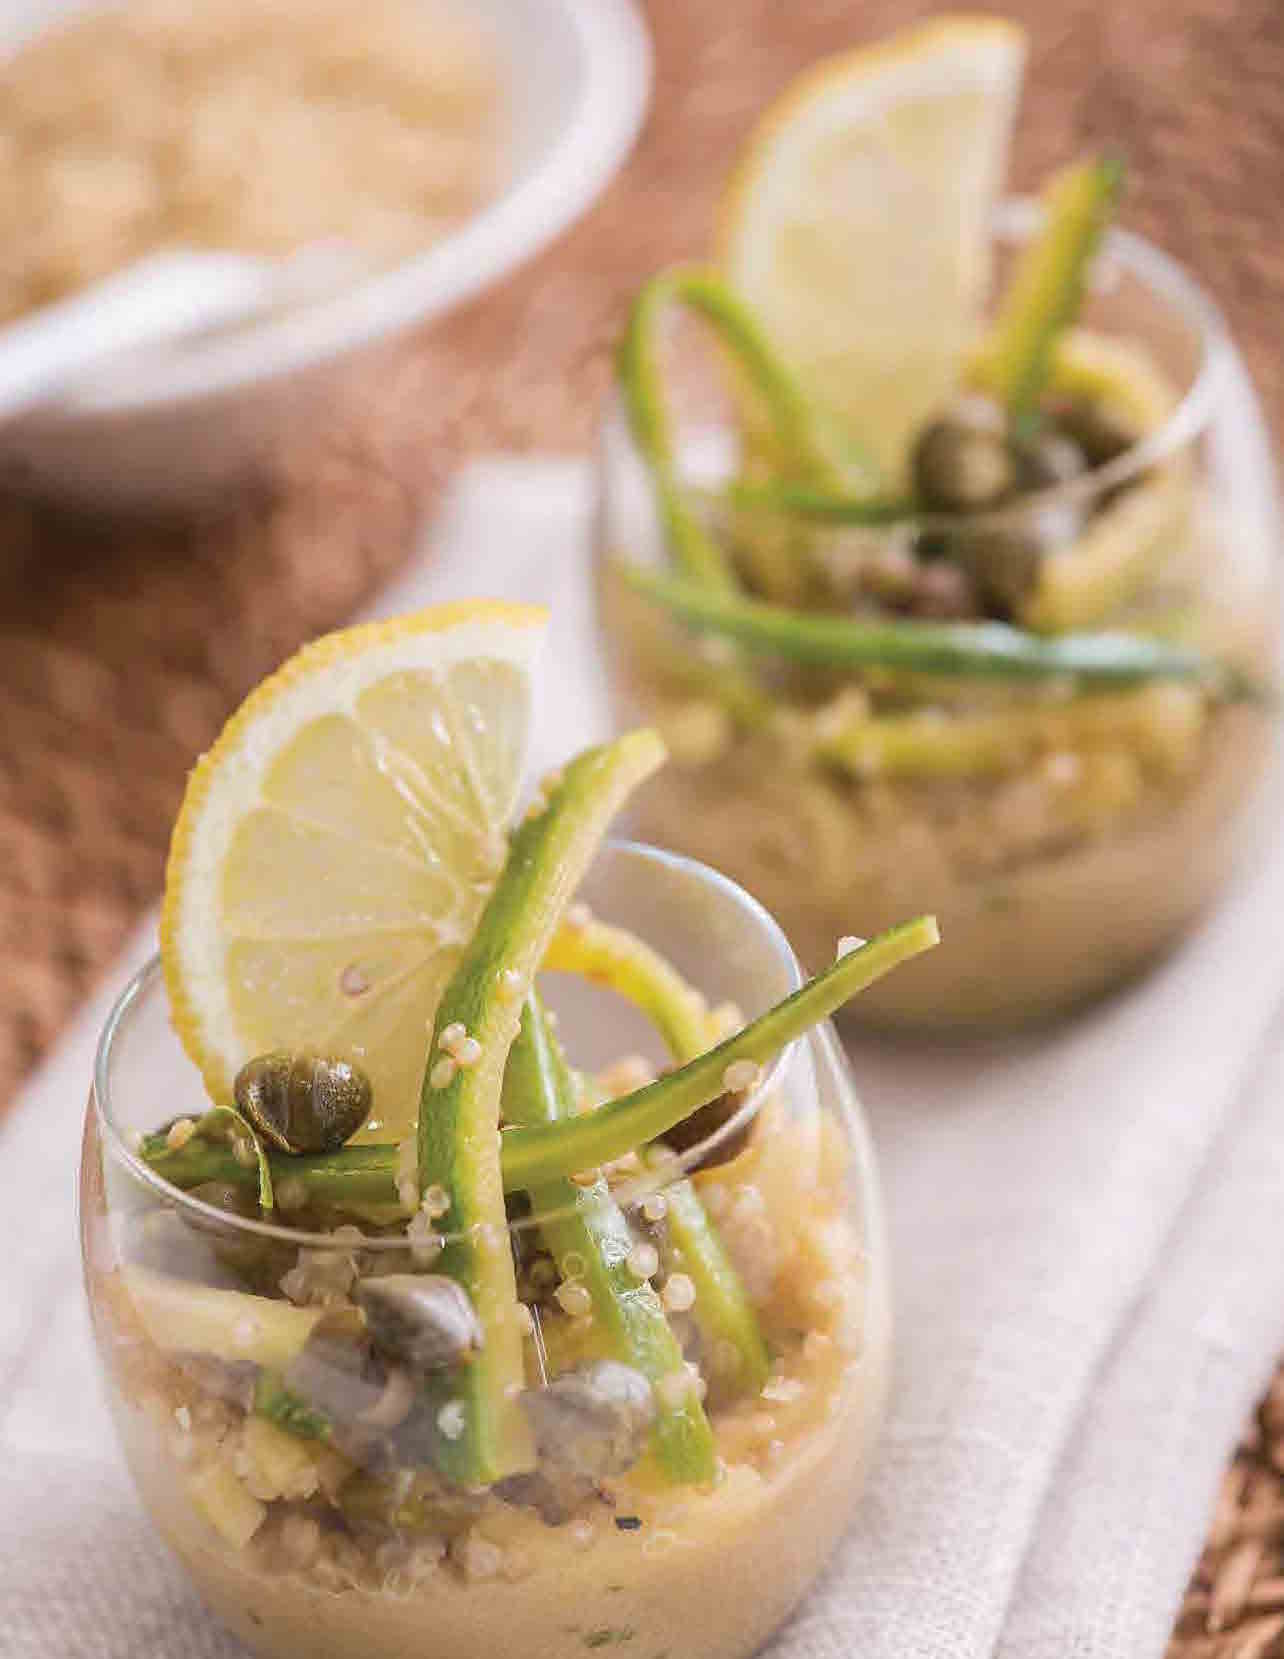 Gluten-free quinoa glasses with marinated courgettes and chickpea sauce